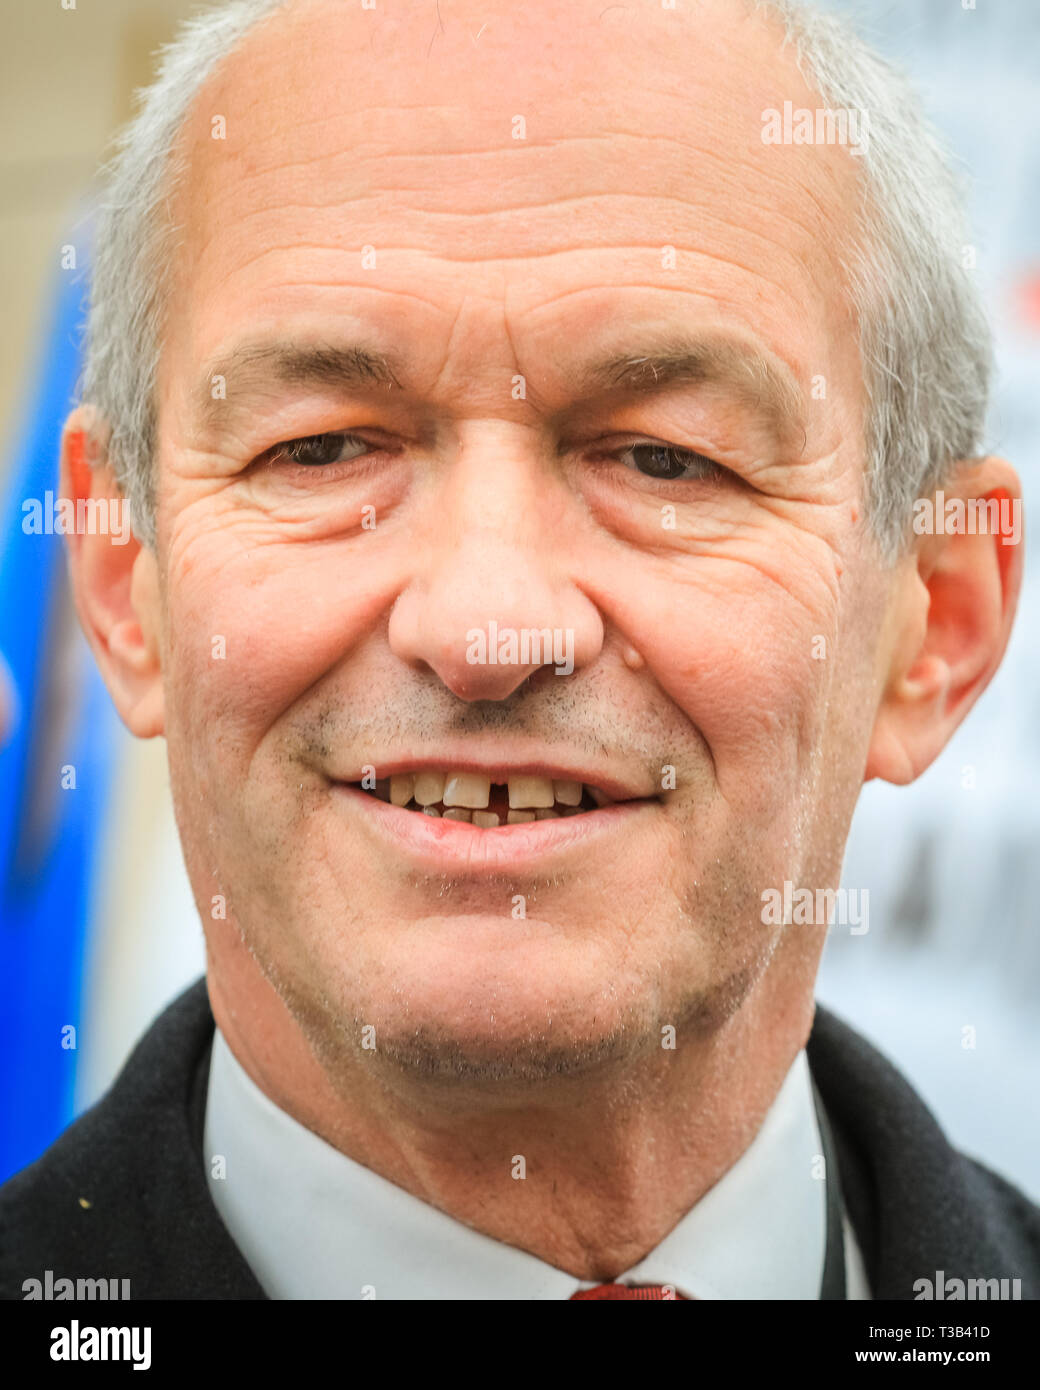 Westminster, UK, 08th April 2019. Labour Party MEP, Richard Corbett, Member of the European Parliament for Yorkshire and the Humber, chats to protesters, many of whom have travelled from Yorkshire. Sodem, group of Anti-Brexit protesters outside the Houses of Parliament in Westminster have organised a 'Brexit Sing Off', and are joined by Yorkshire for Europe, opera singer Dame Sarah Connolly, journalist and former Labour Communications Director Alastair Campbell and others for a musical protest against Brexit. Credit: Imageplotter/Alamy Live News Stock Photo